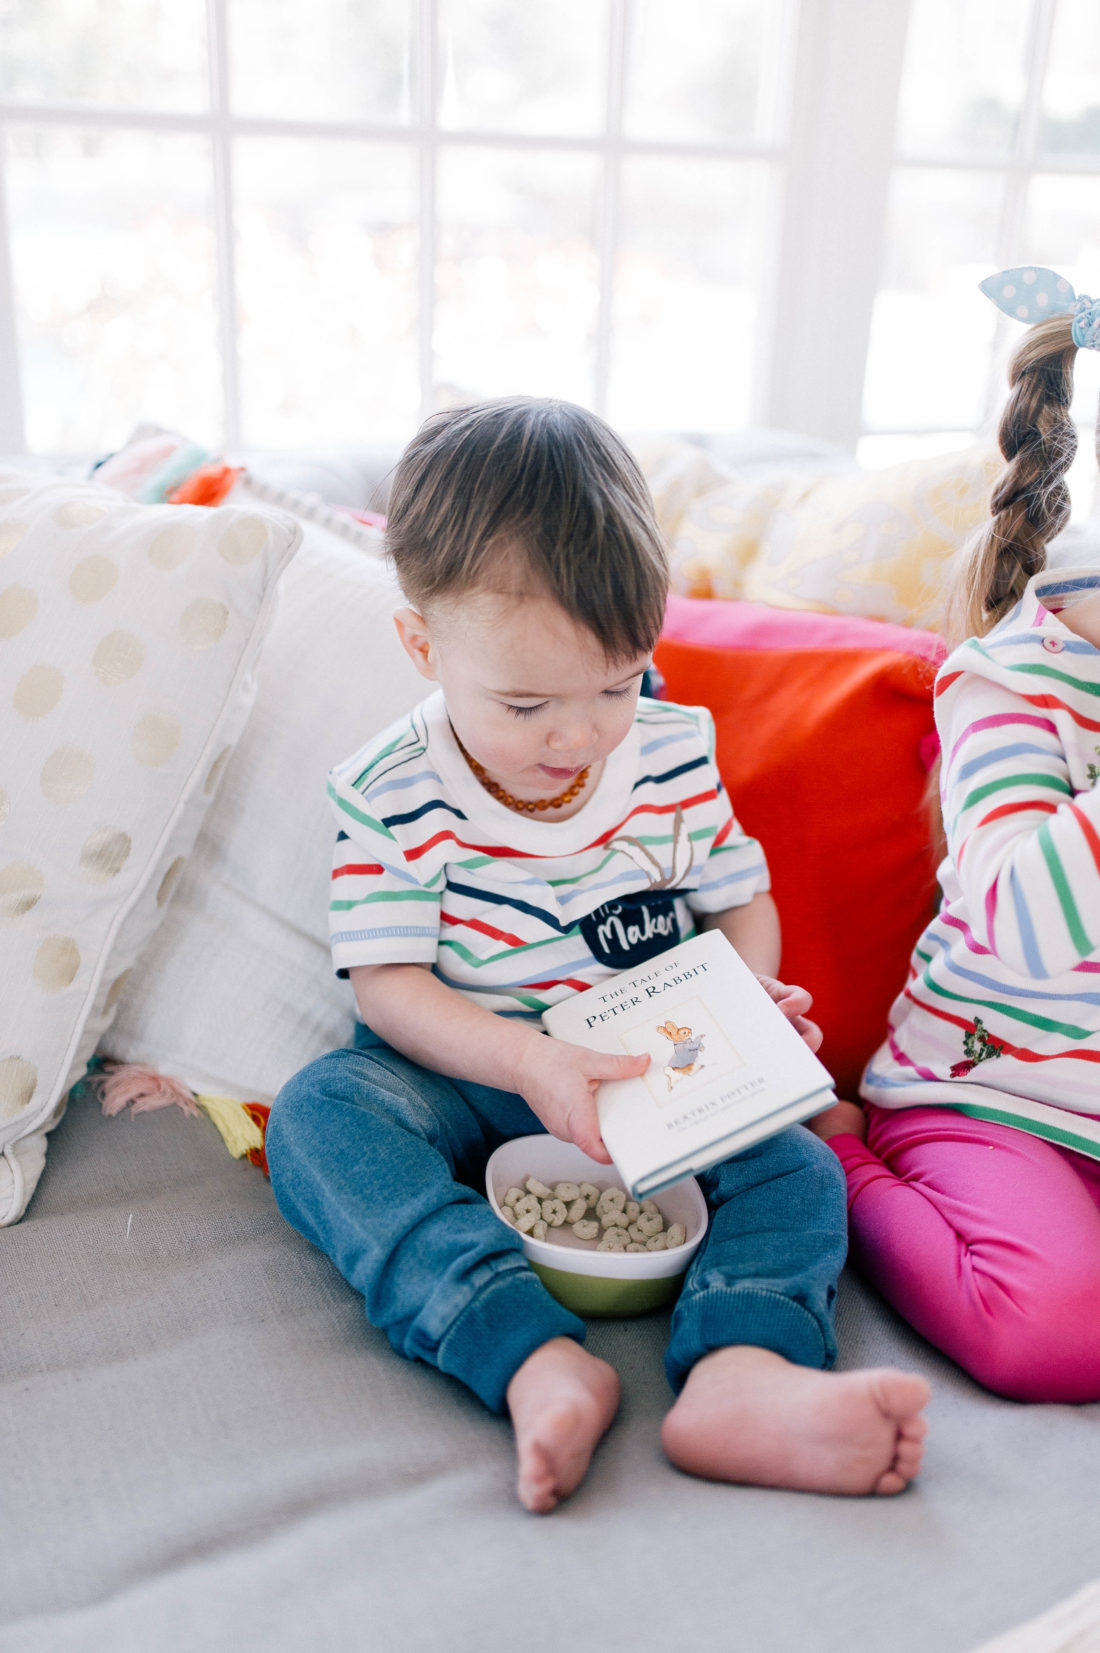 Major Martino wears a striped top and reads Peter Rabbit with a bowl of snacks